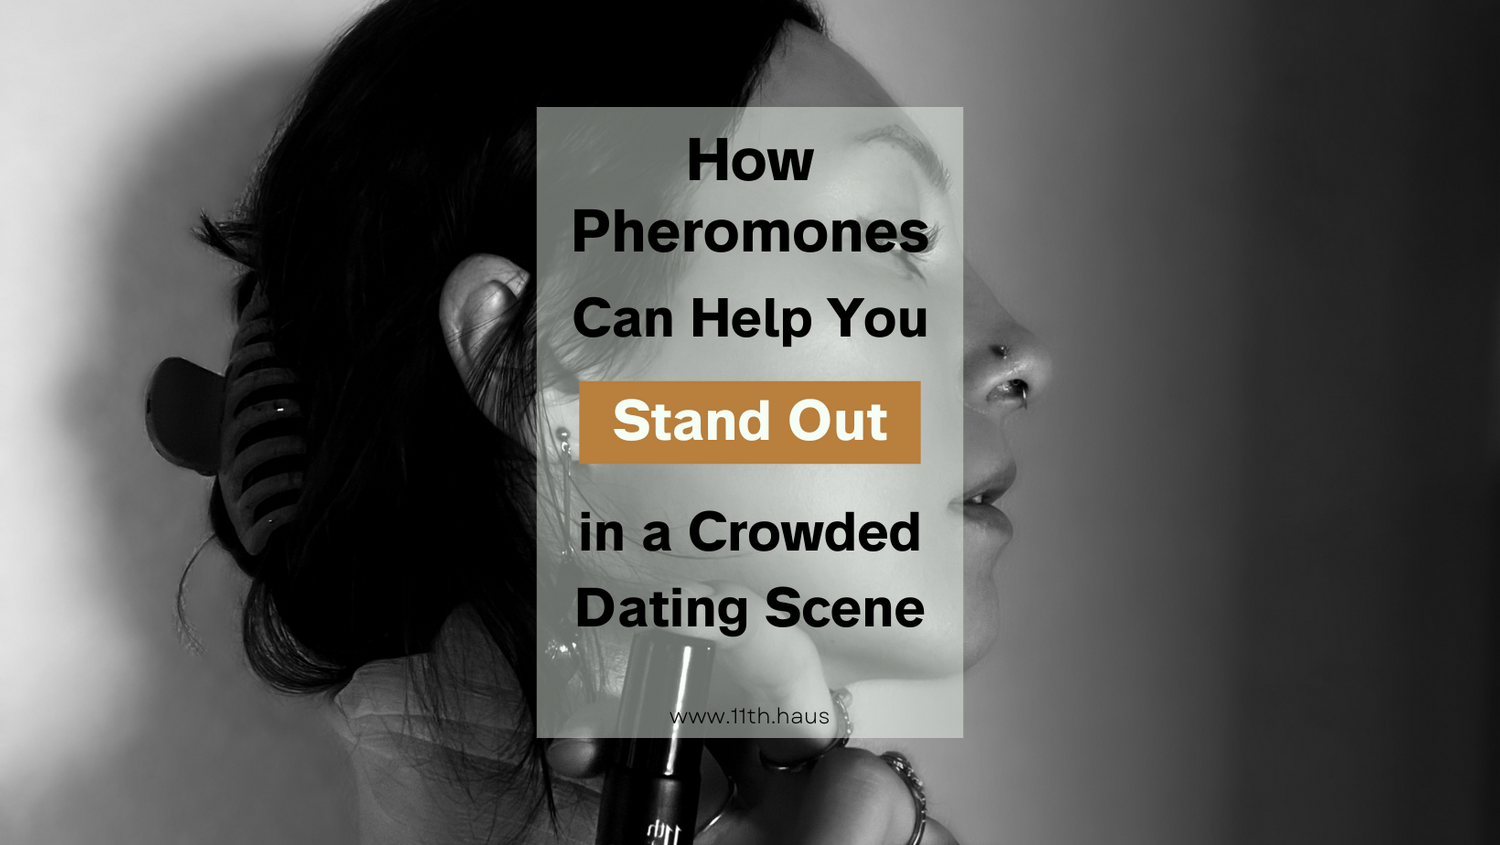 How Pheromones Can Help You Stand Out in a Crowded Dating Scene